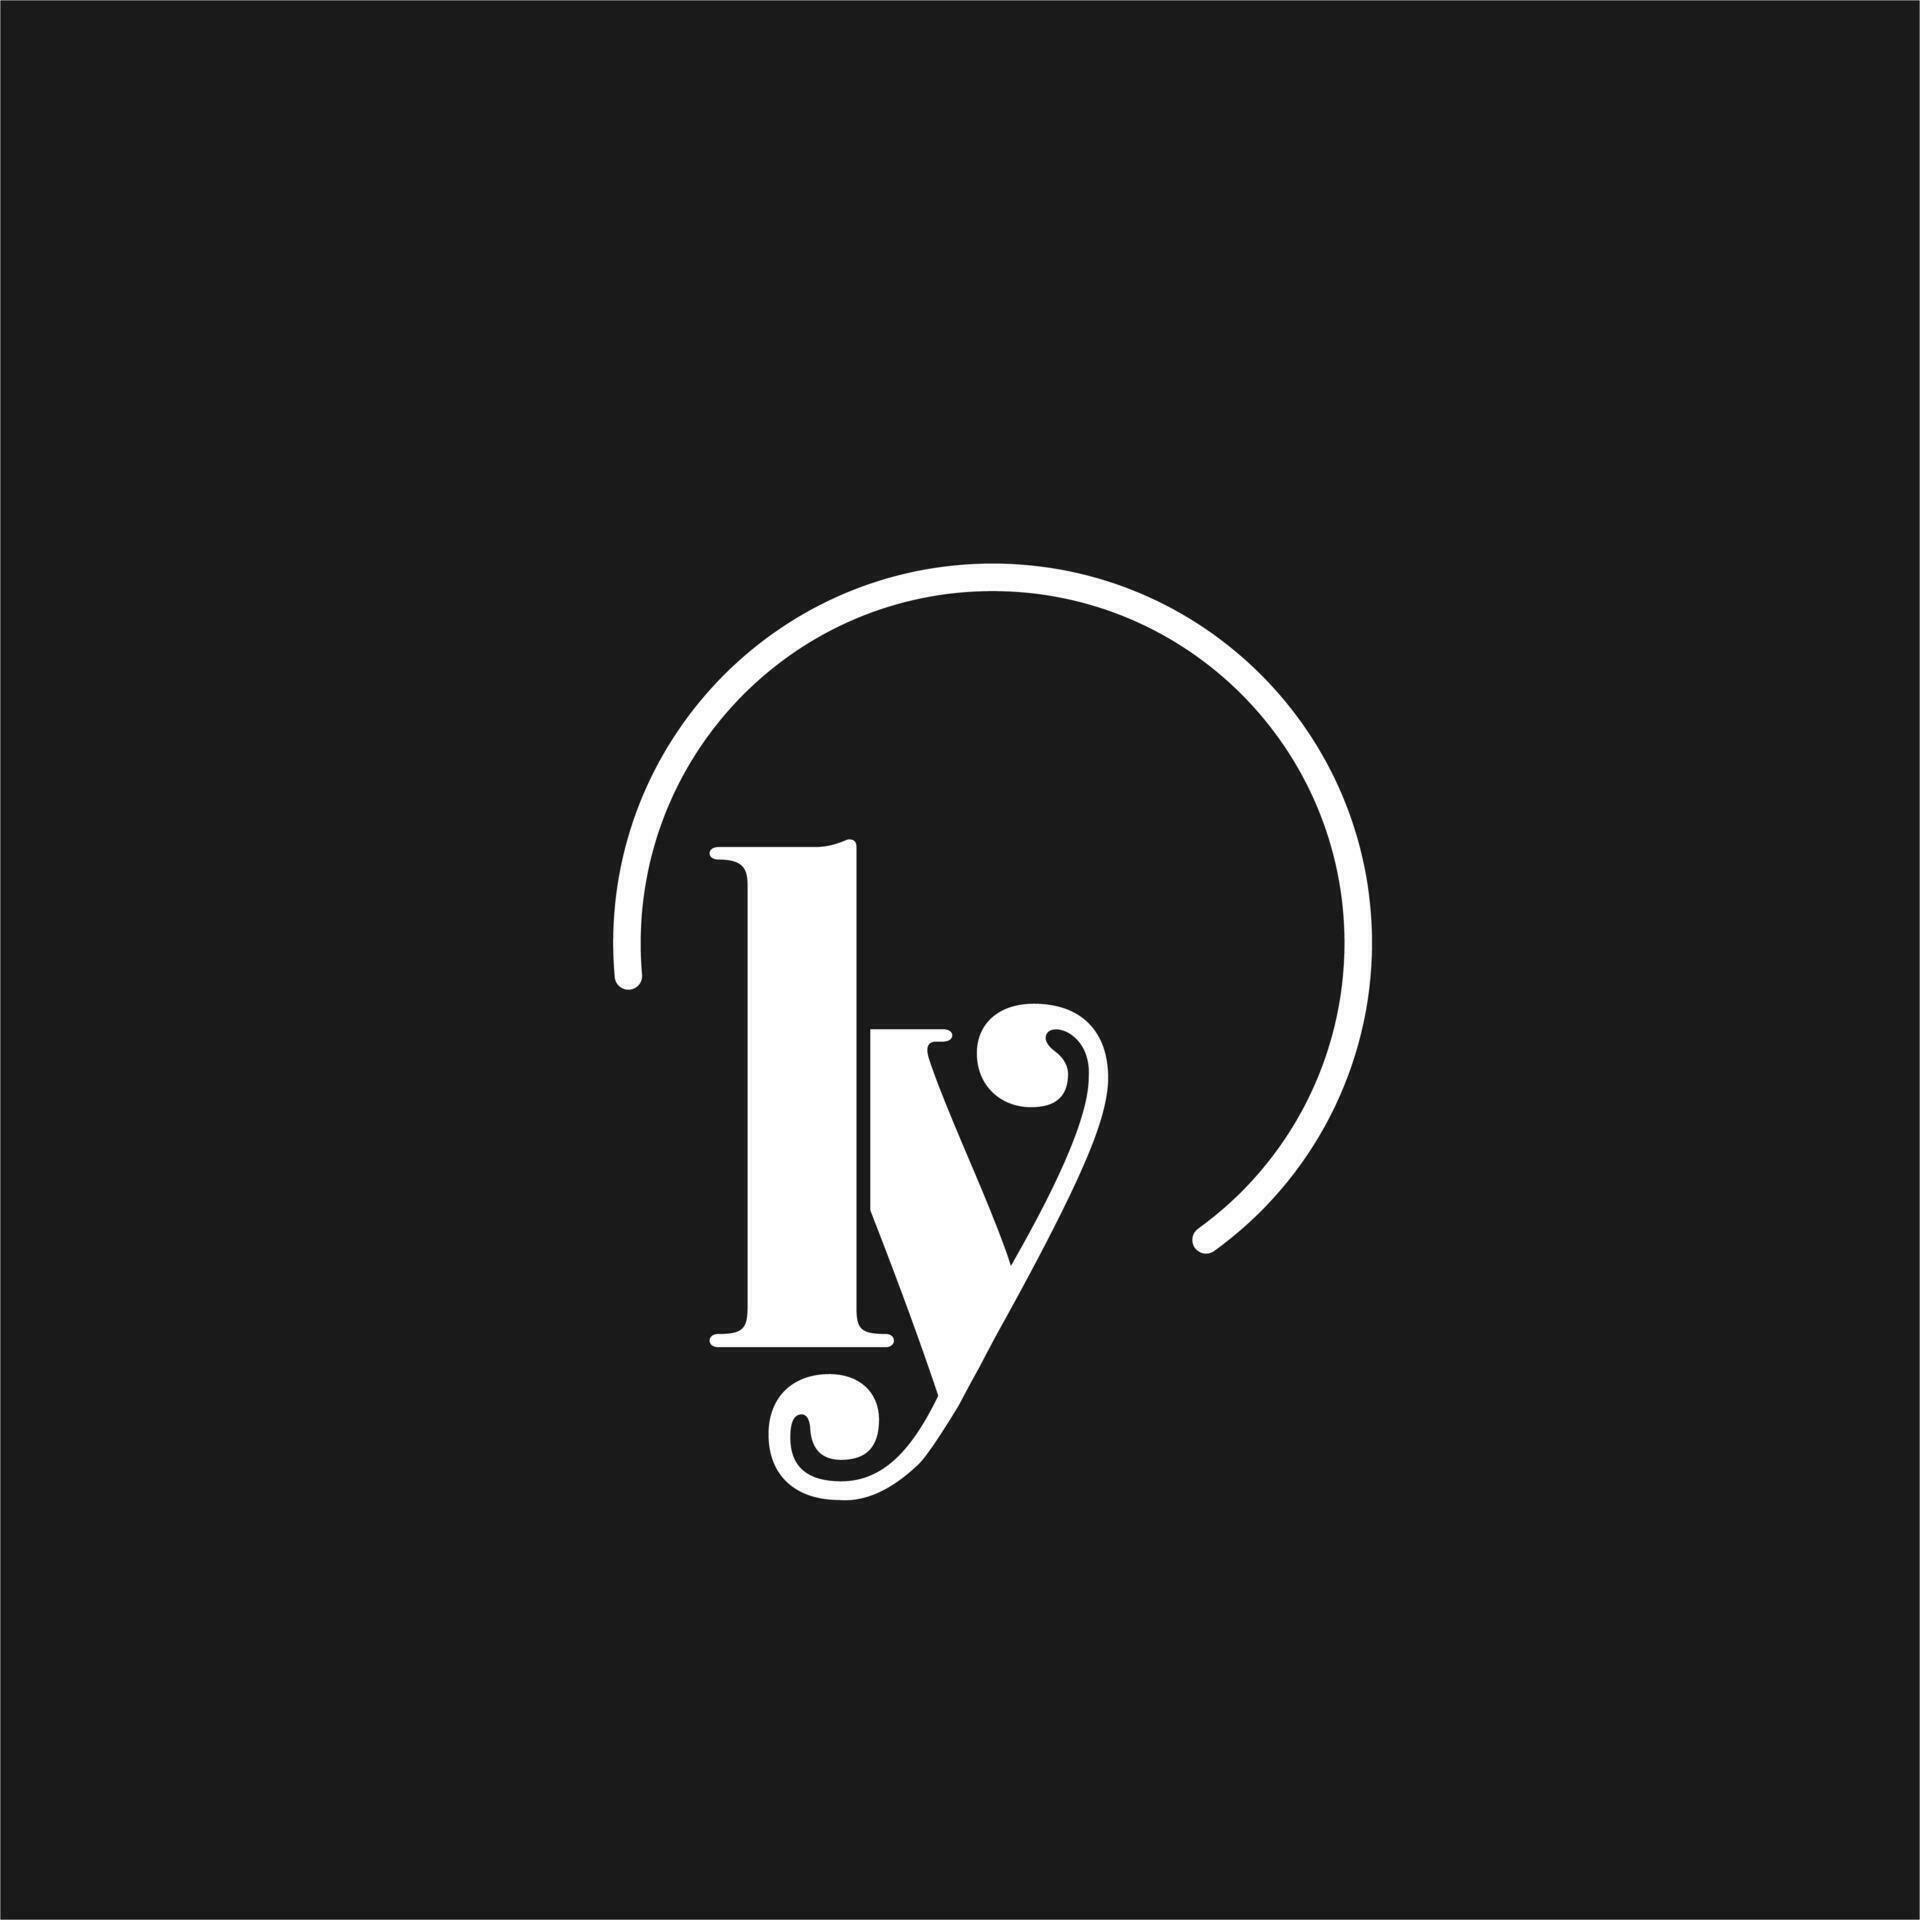 LY logo initials monogram with circular lines, minimalist and clean ...